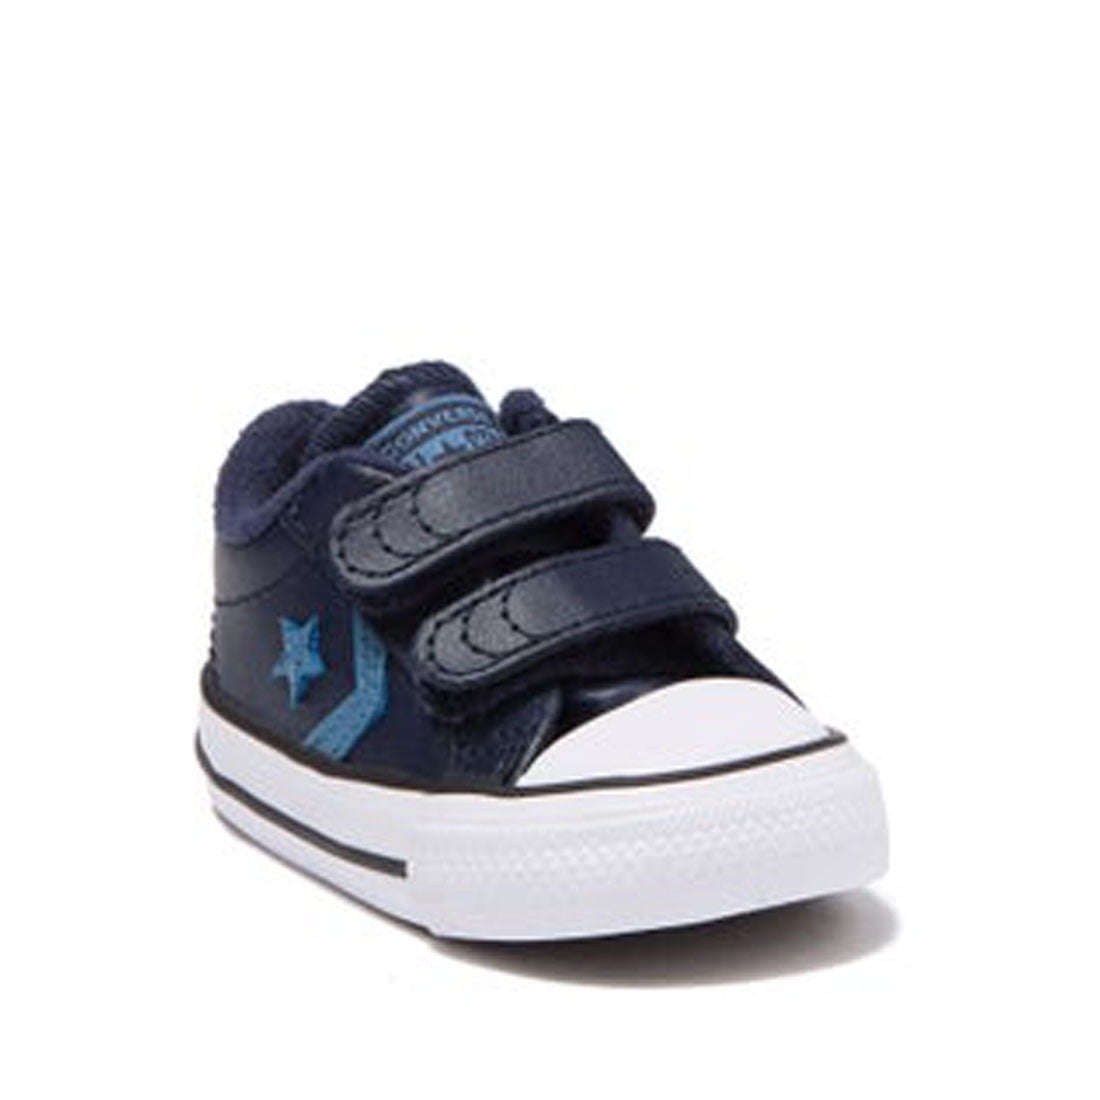 Converse Star Player 2V Oxford Unisex/Toddler Shoe Size Toddler Casual 766045C Obsidian/Aegean - Walmart.com